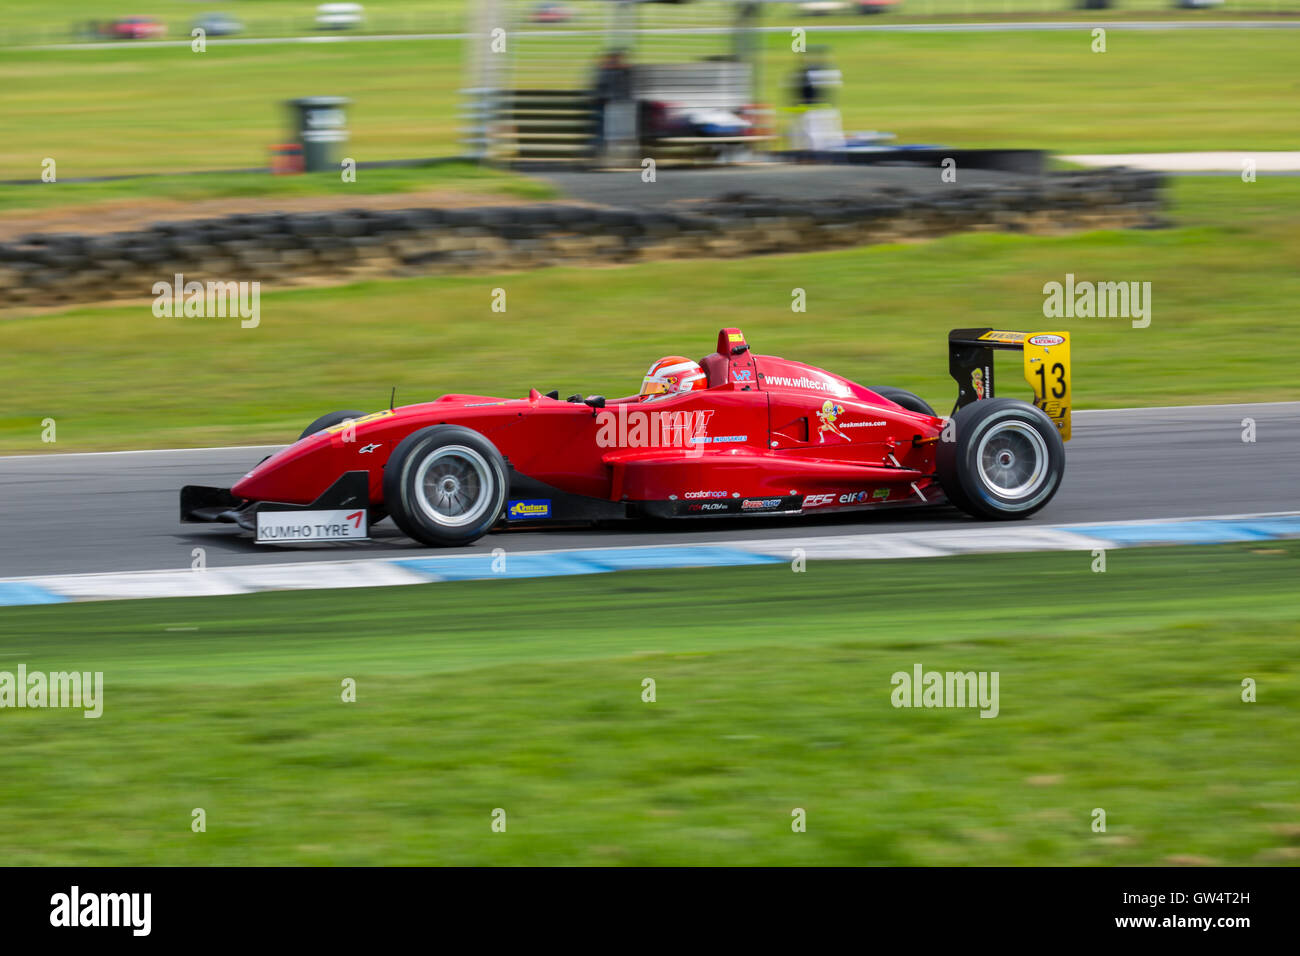 MELBOURNE/AUSTRALIA - SEPTEMBER 9-11, 2016: Racecars going for podium at Round 6 of the Shannon's Nationals at Phillip Island GP Track in Victoria, Australia - 9-11 September. Stock Photo